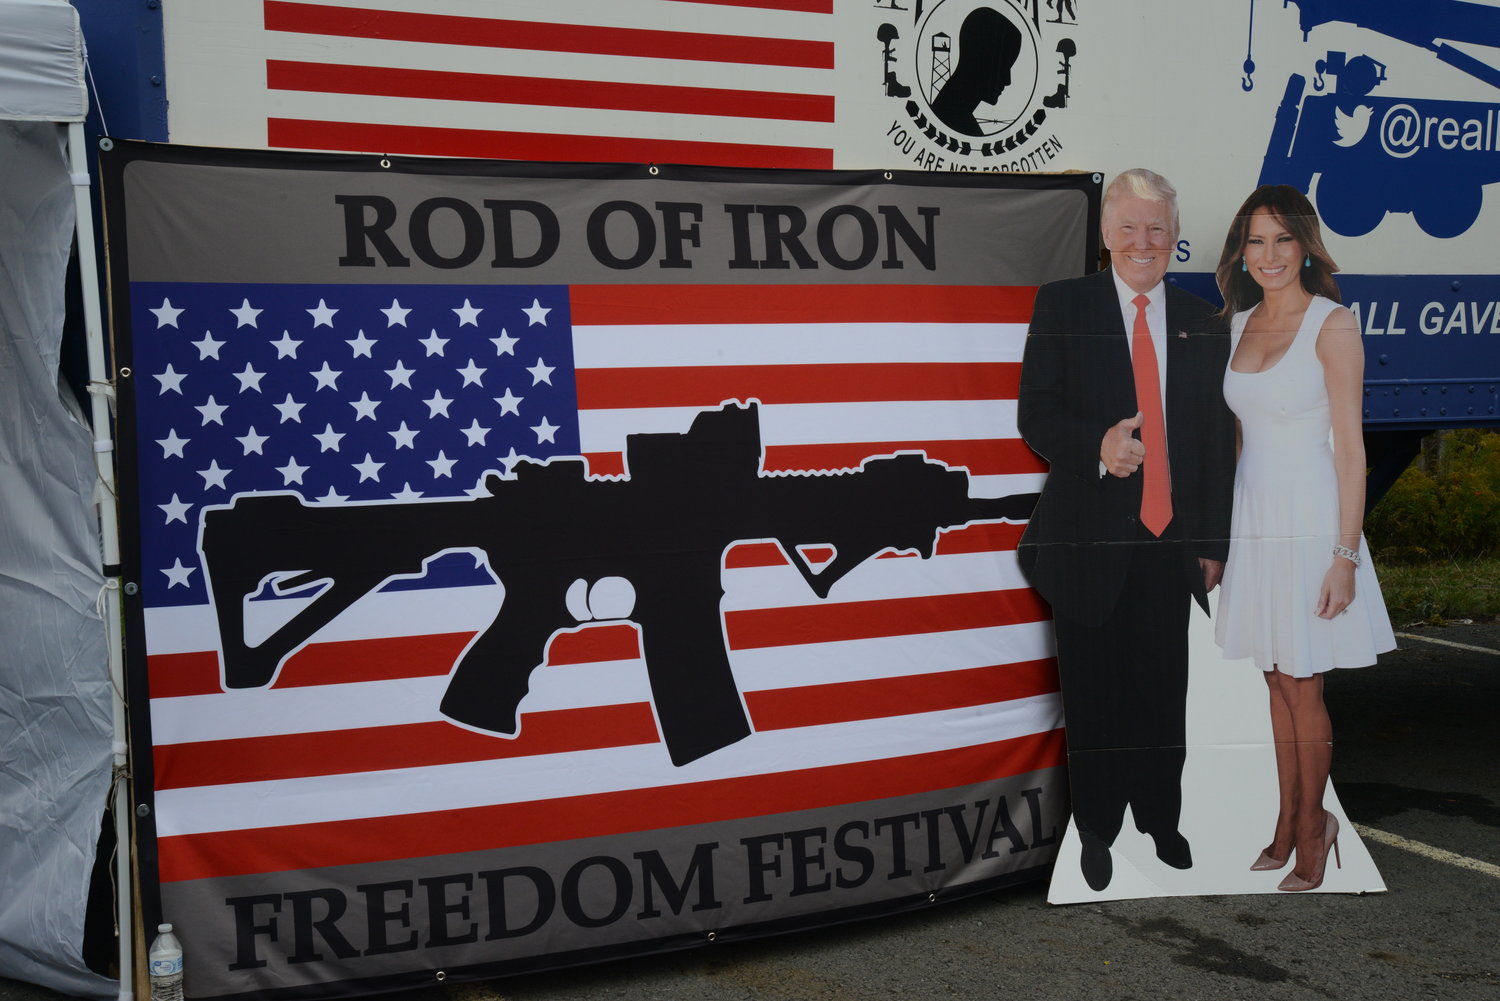 The Rod of Iron Freedom Festival was fraught with political rhetoric and imagery.